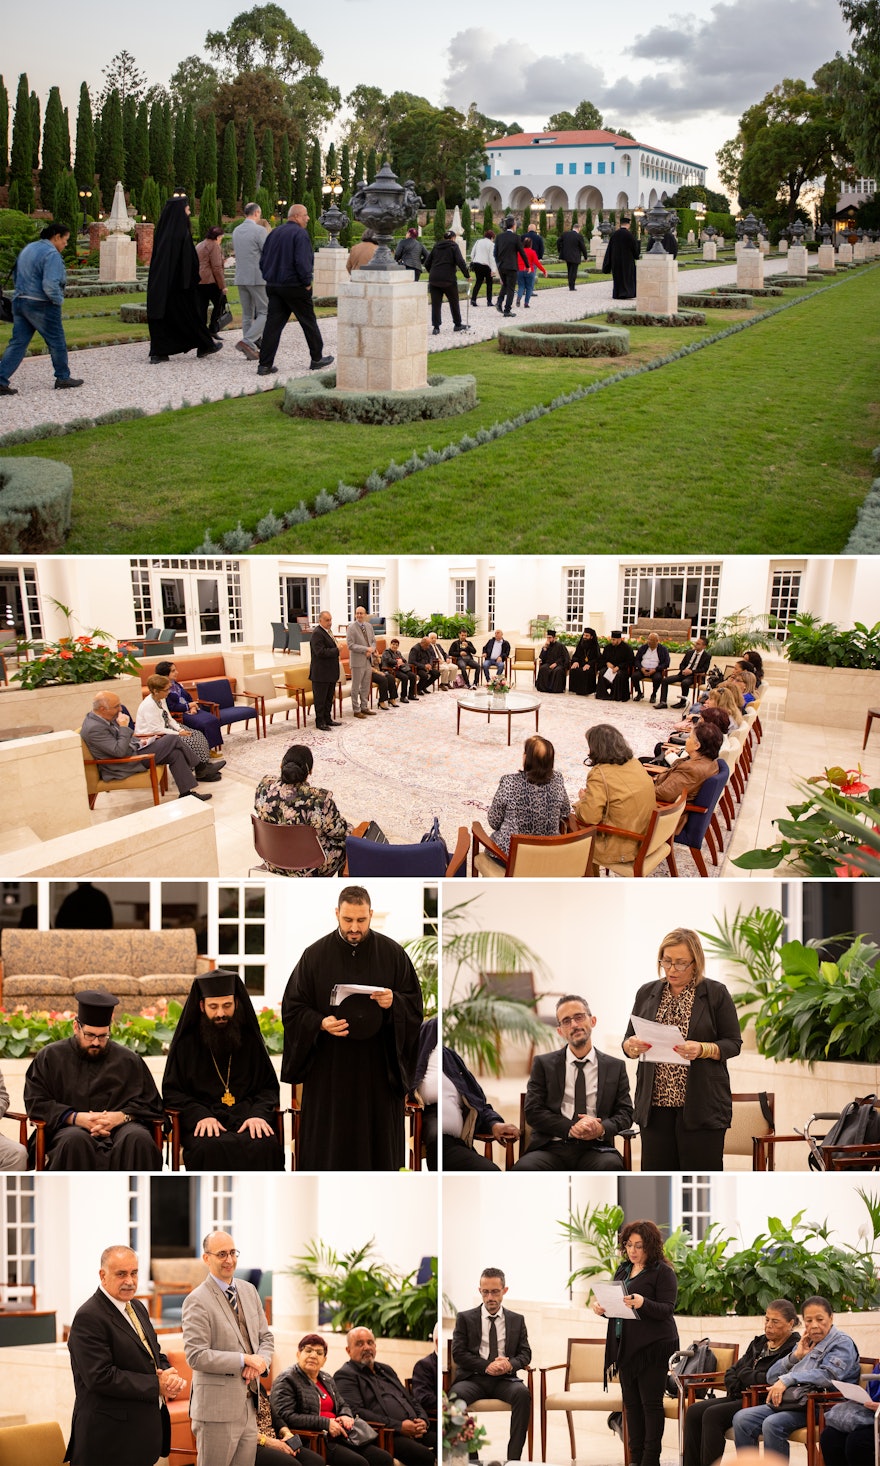 A 20-member delegation from the Greek Orthodox community and members of the Congregational Council as well as the Archbishopric Women’s Movement visited the Shrine of Bahá’u’lláh and then gathered at the Bahjí Visitors’ Centre for prayers.